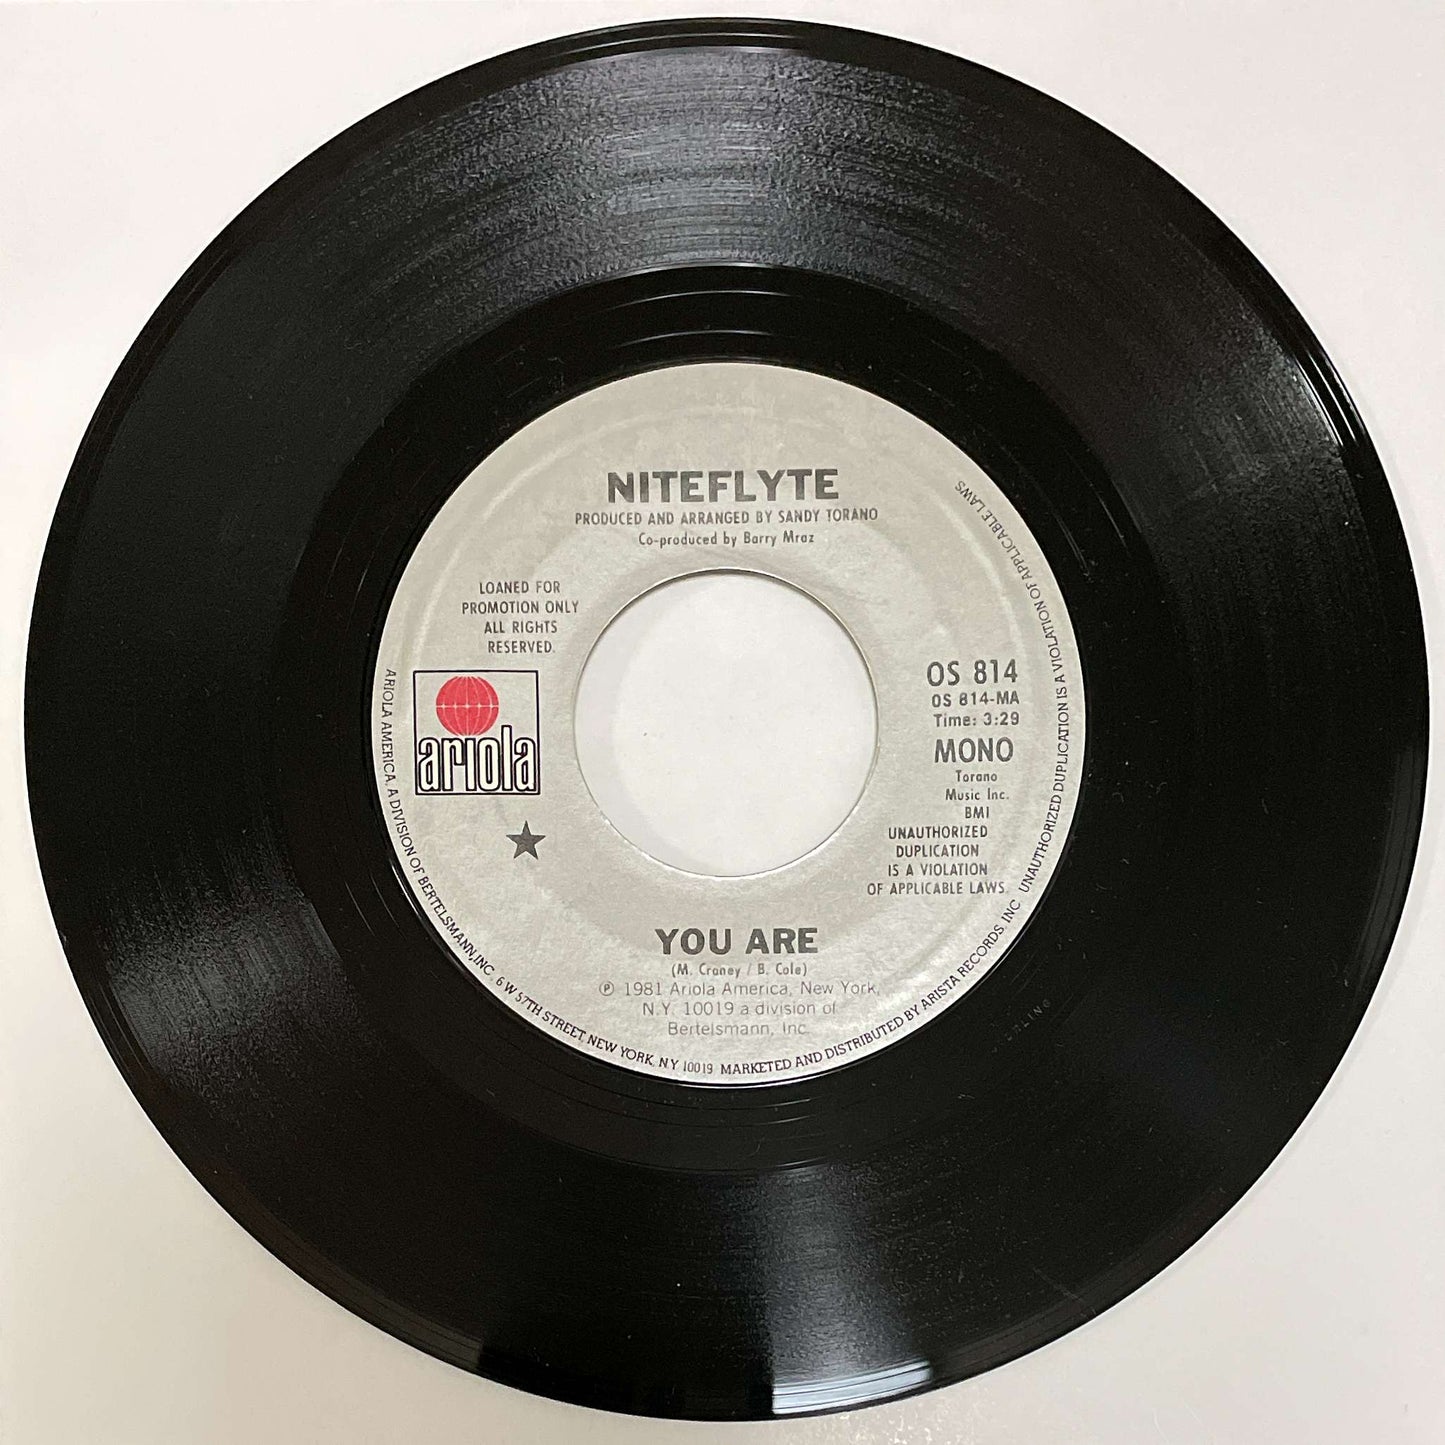 Niteflyte – You Are ( Ariola ) 45